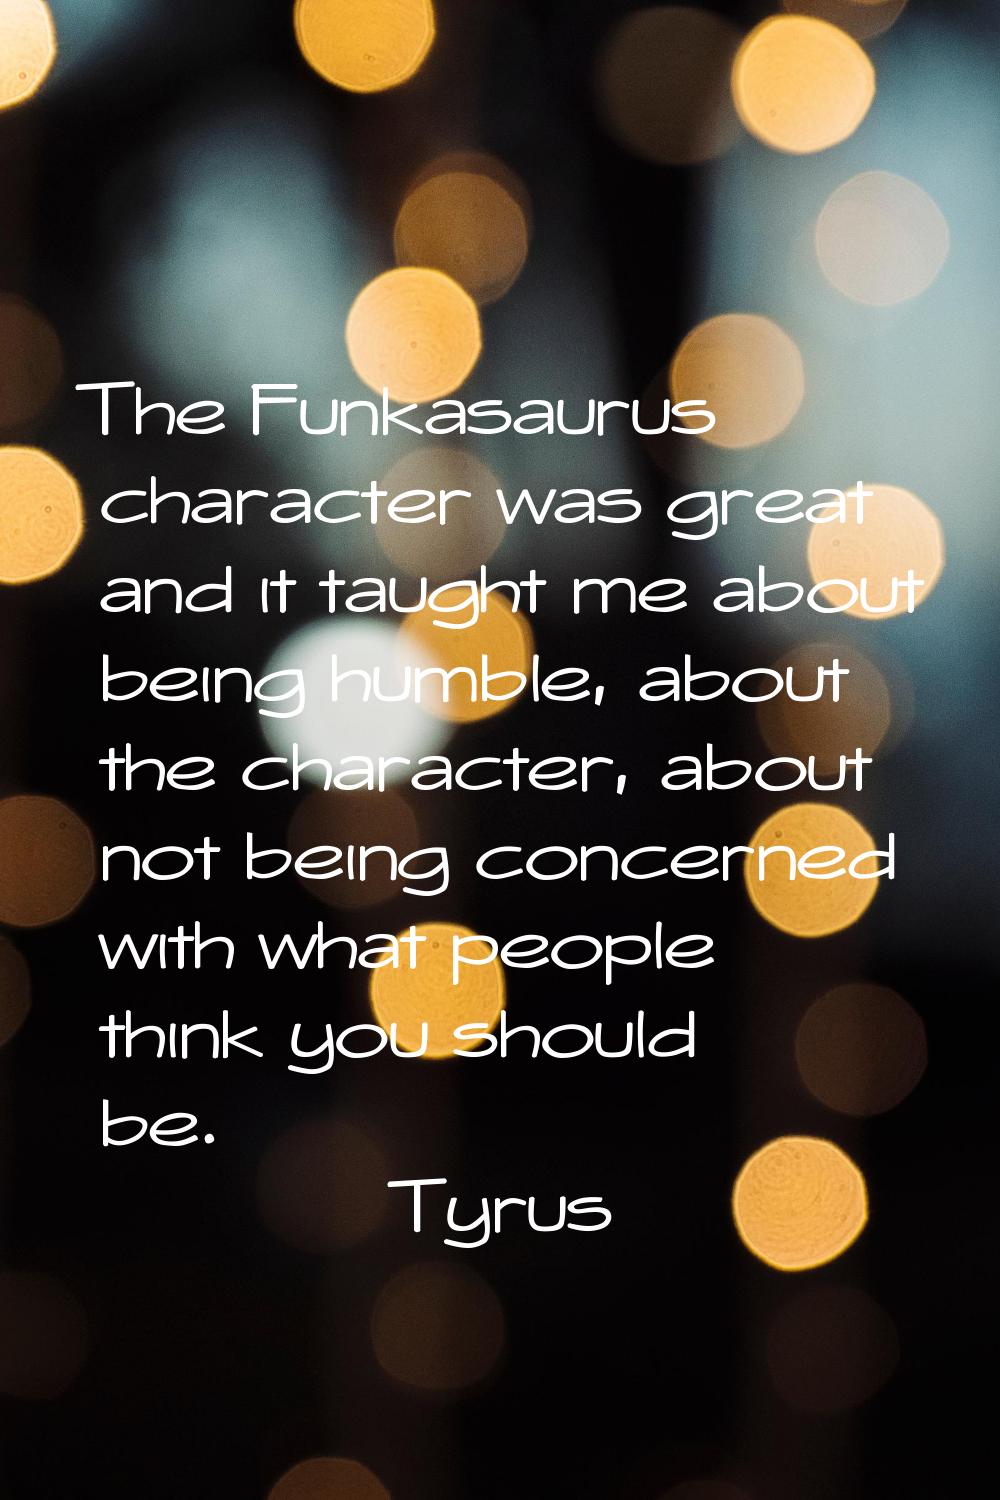 The Funkasaurus character was great and it taught me about being humble, about the character, about